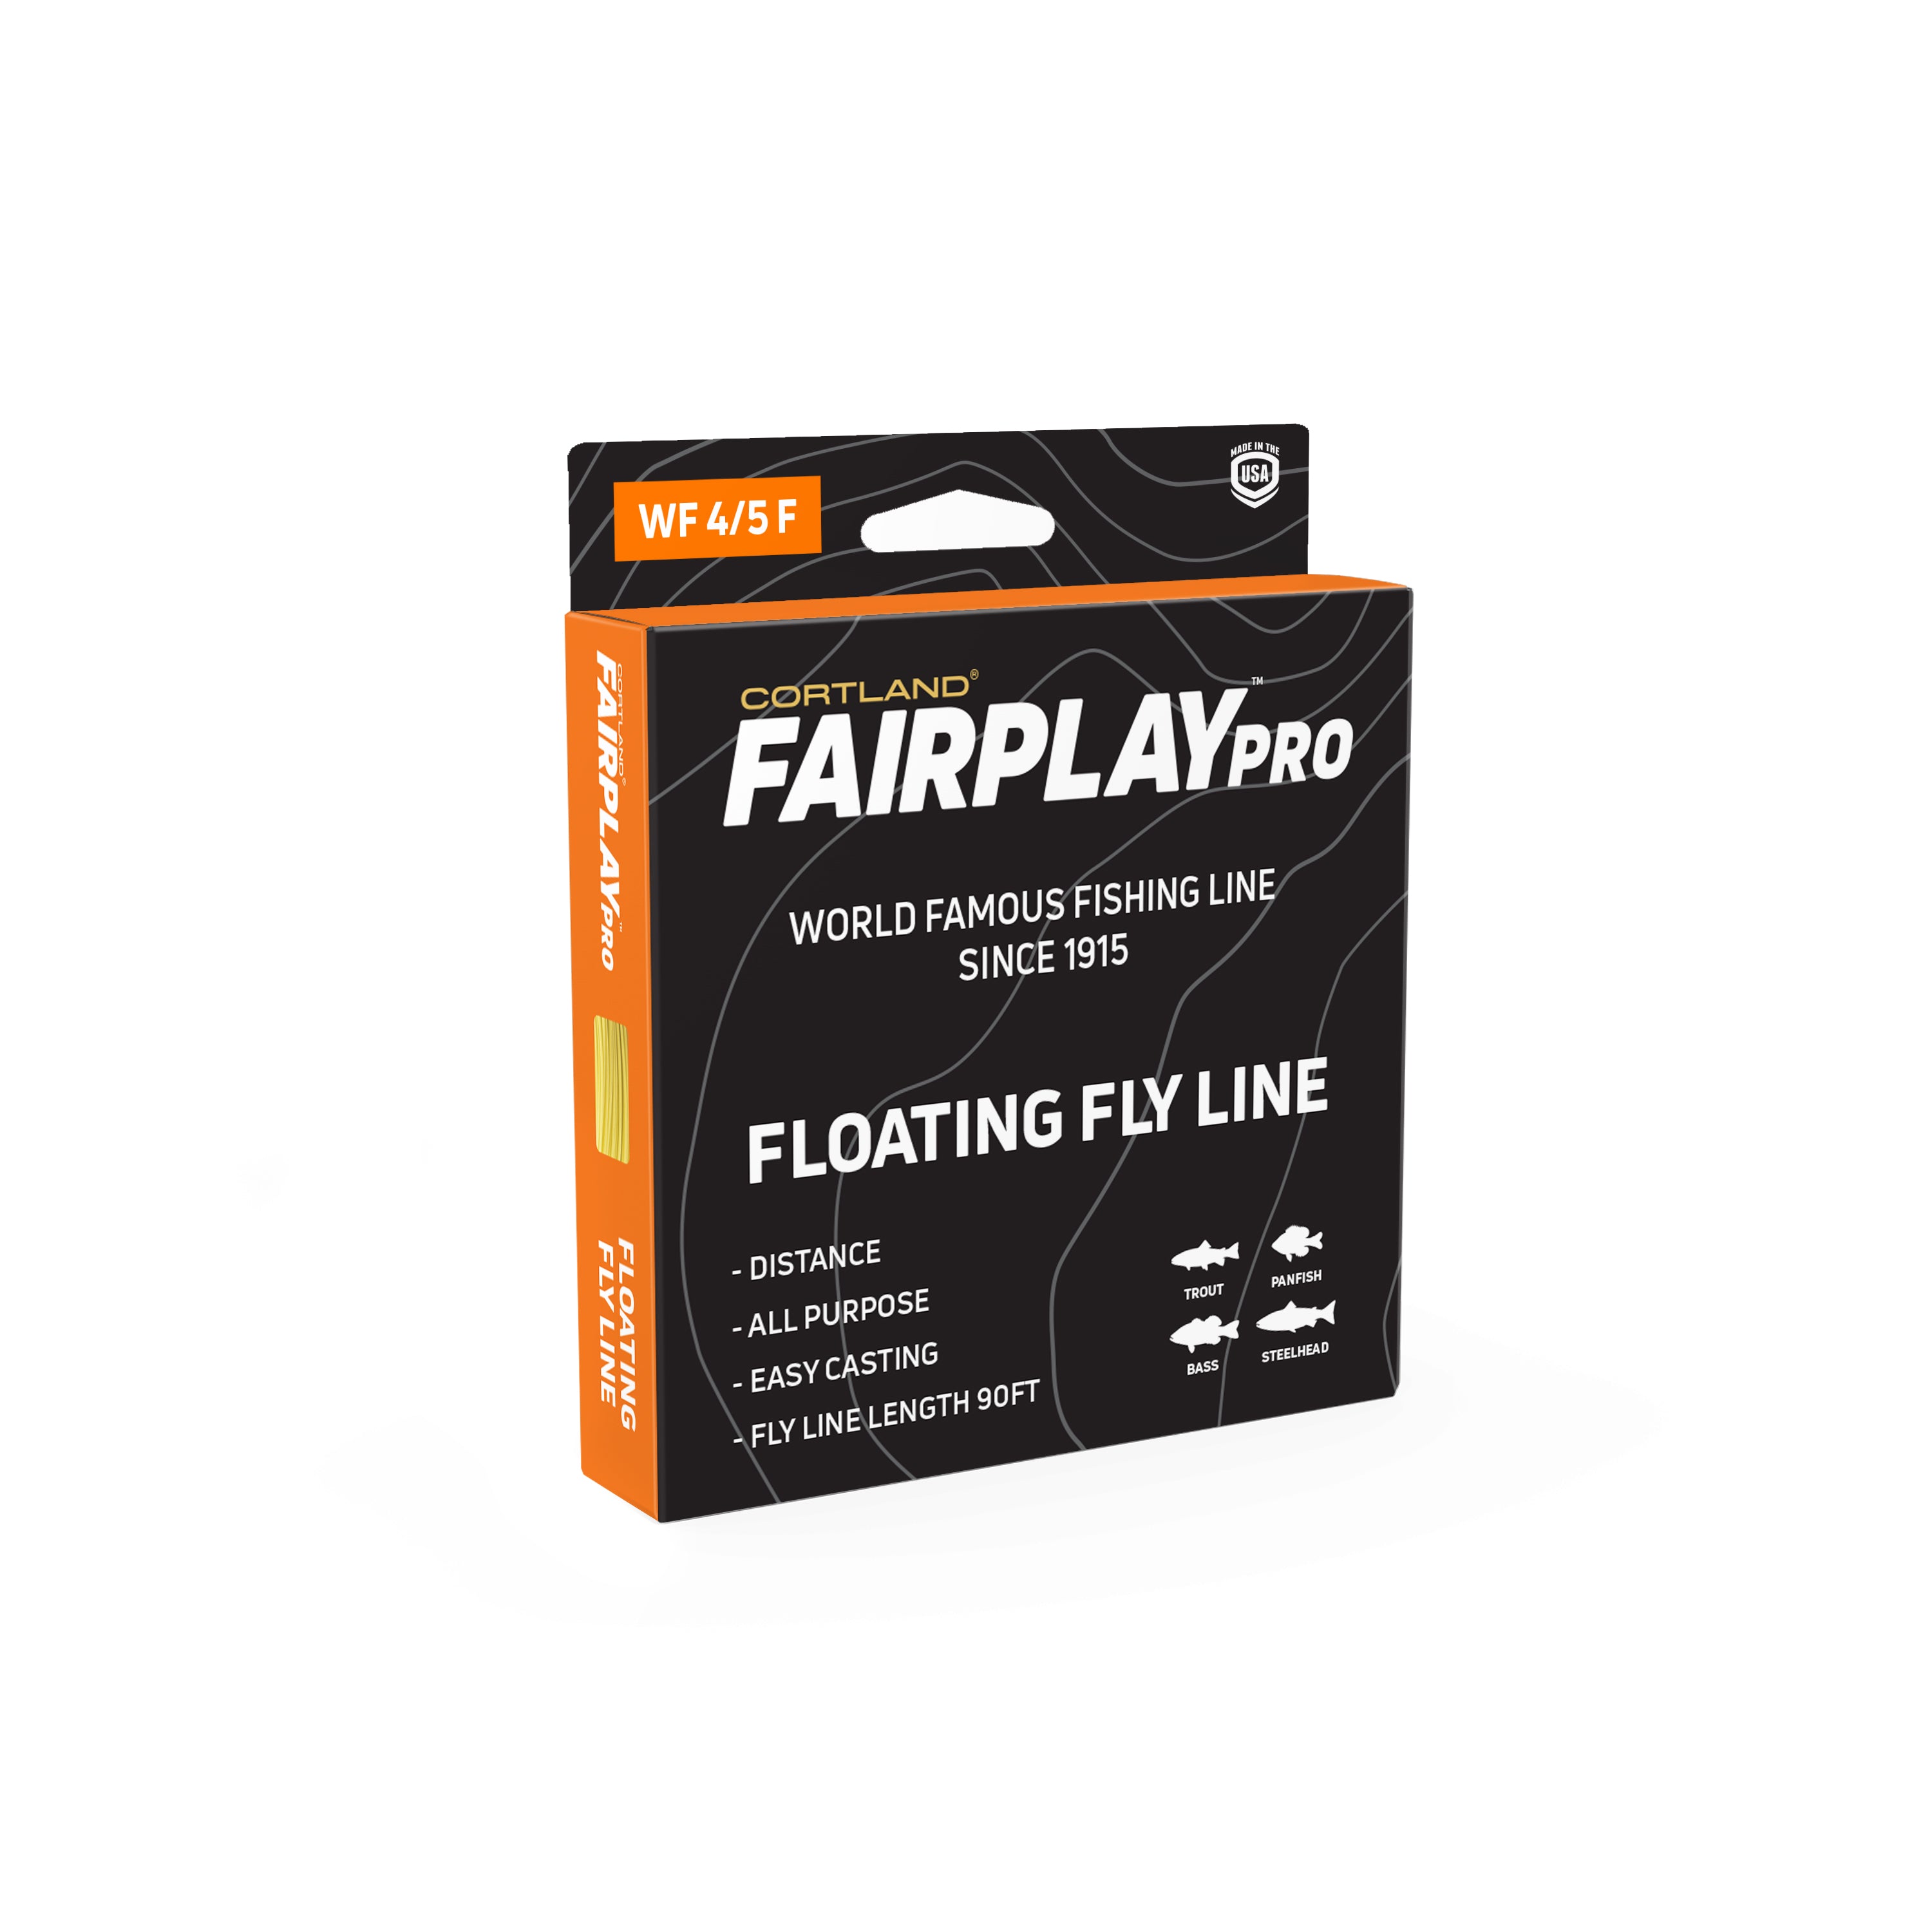 Cortland Fairplay Pro Fly Line, Wf4/5f, 90ft, 326125, Size: Assorted